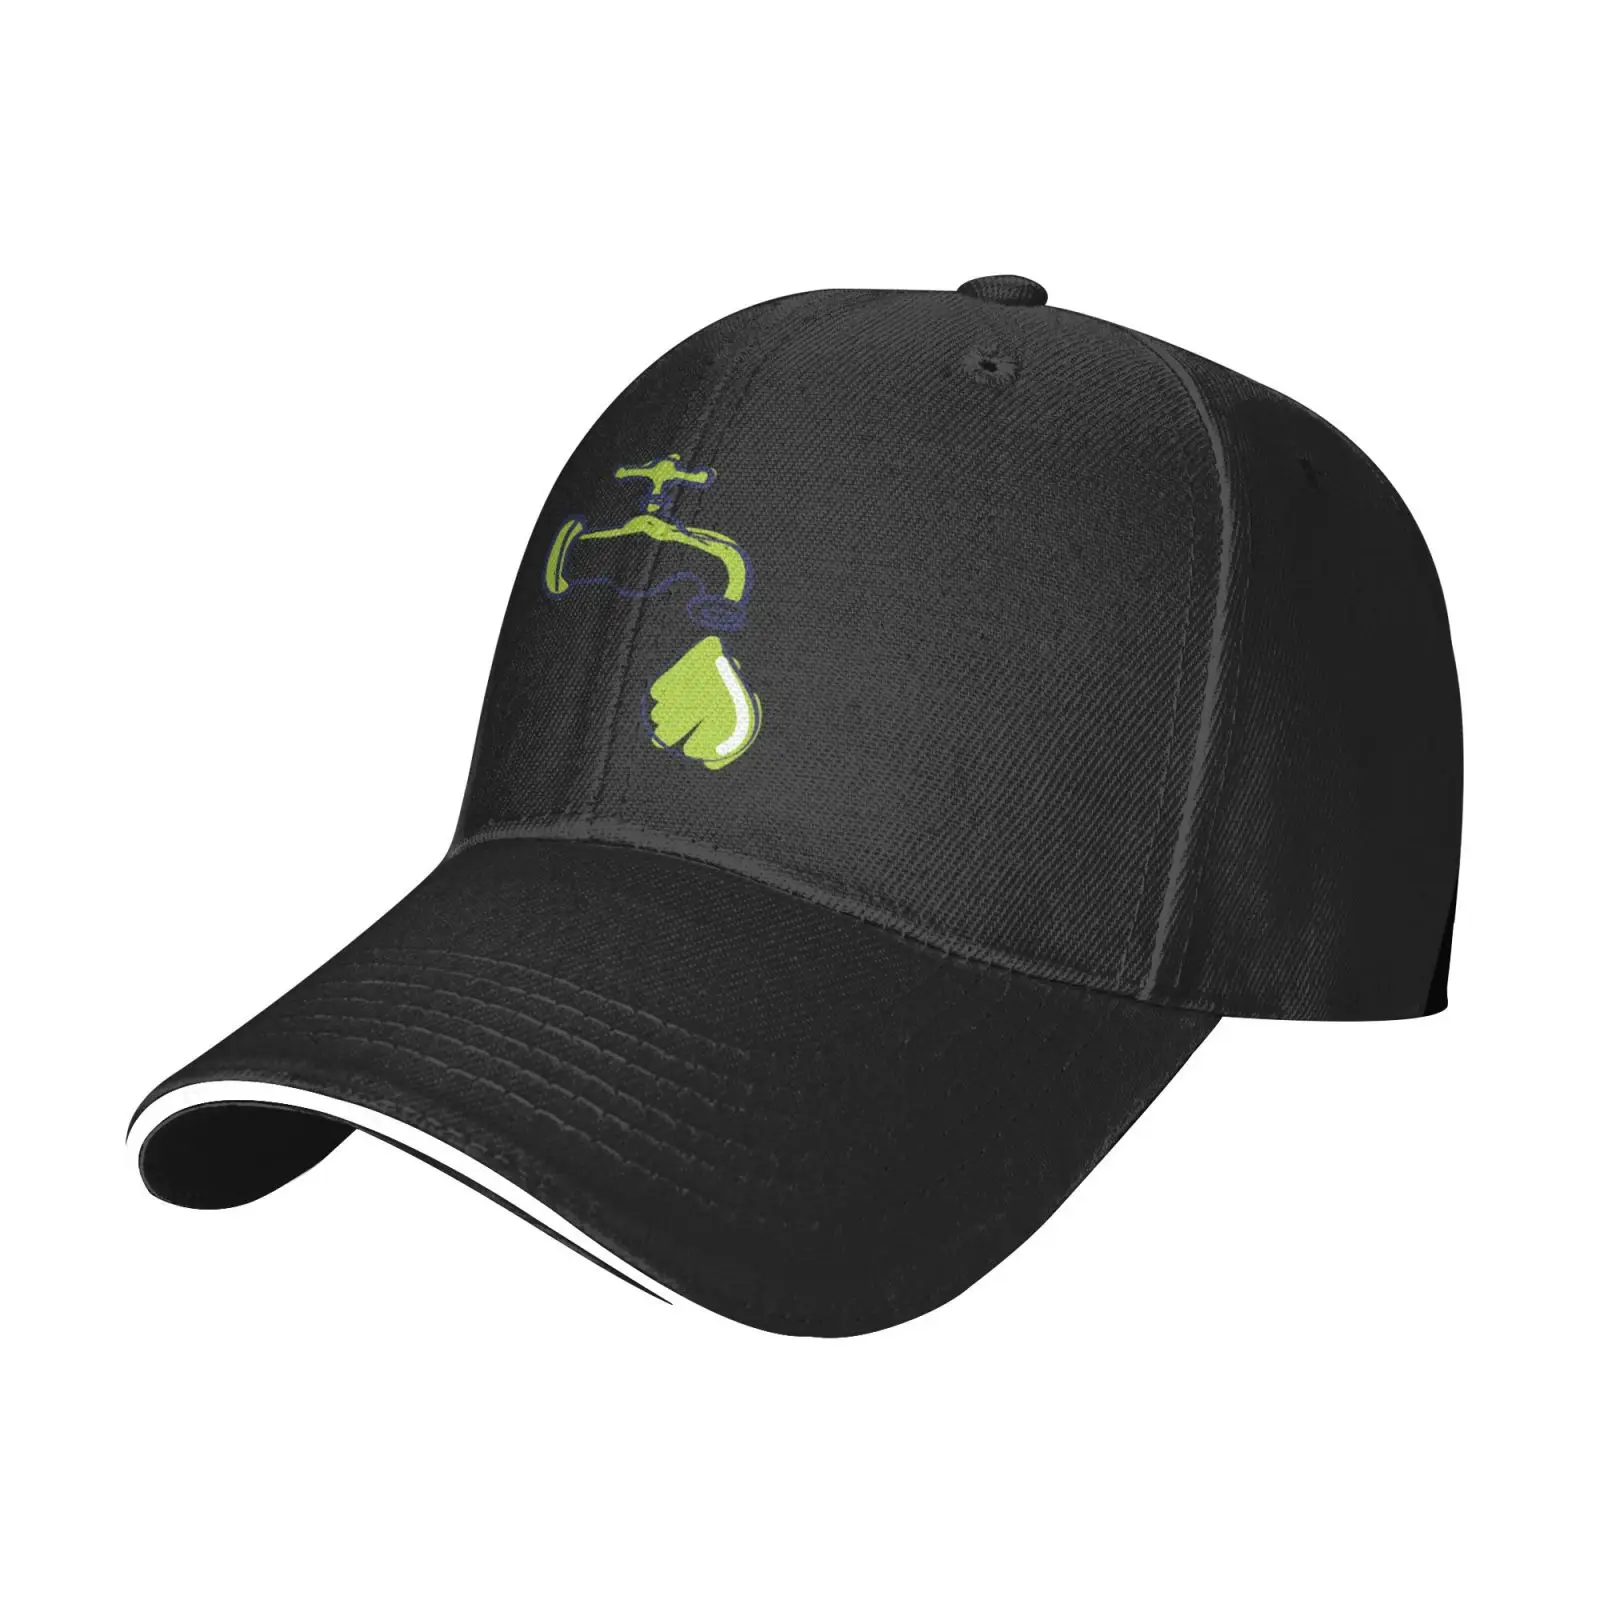 

Water Tap Green Baseball Cap Adjustable Cotton or Polyester Lightweight Visor Hat Easy To Carry Simple Design Four Seasons Print